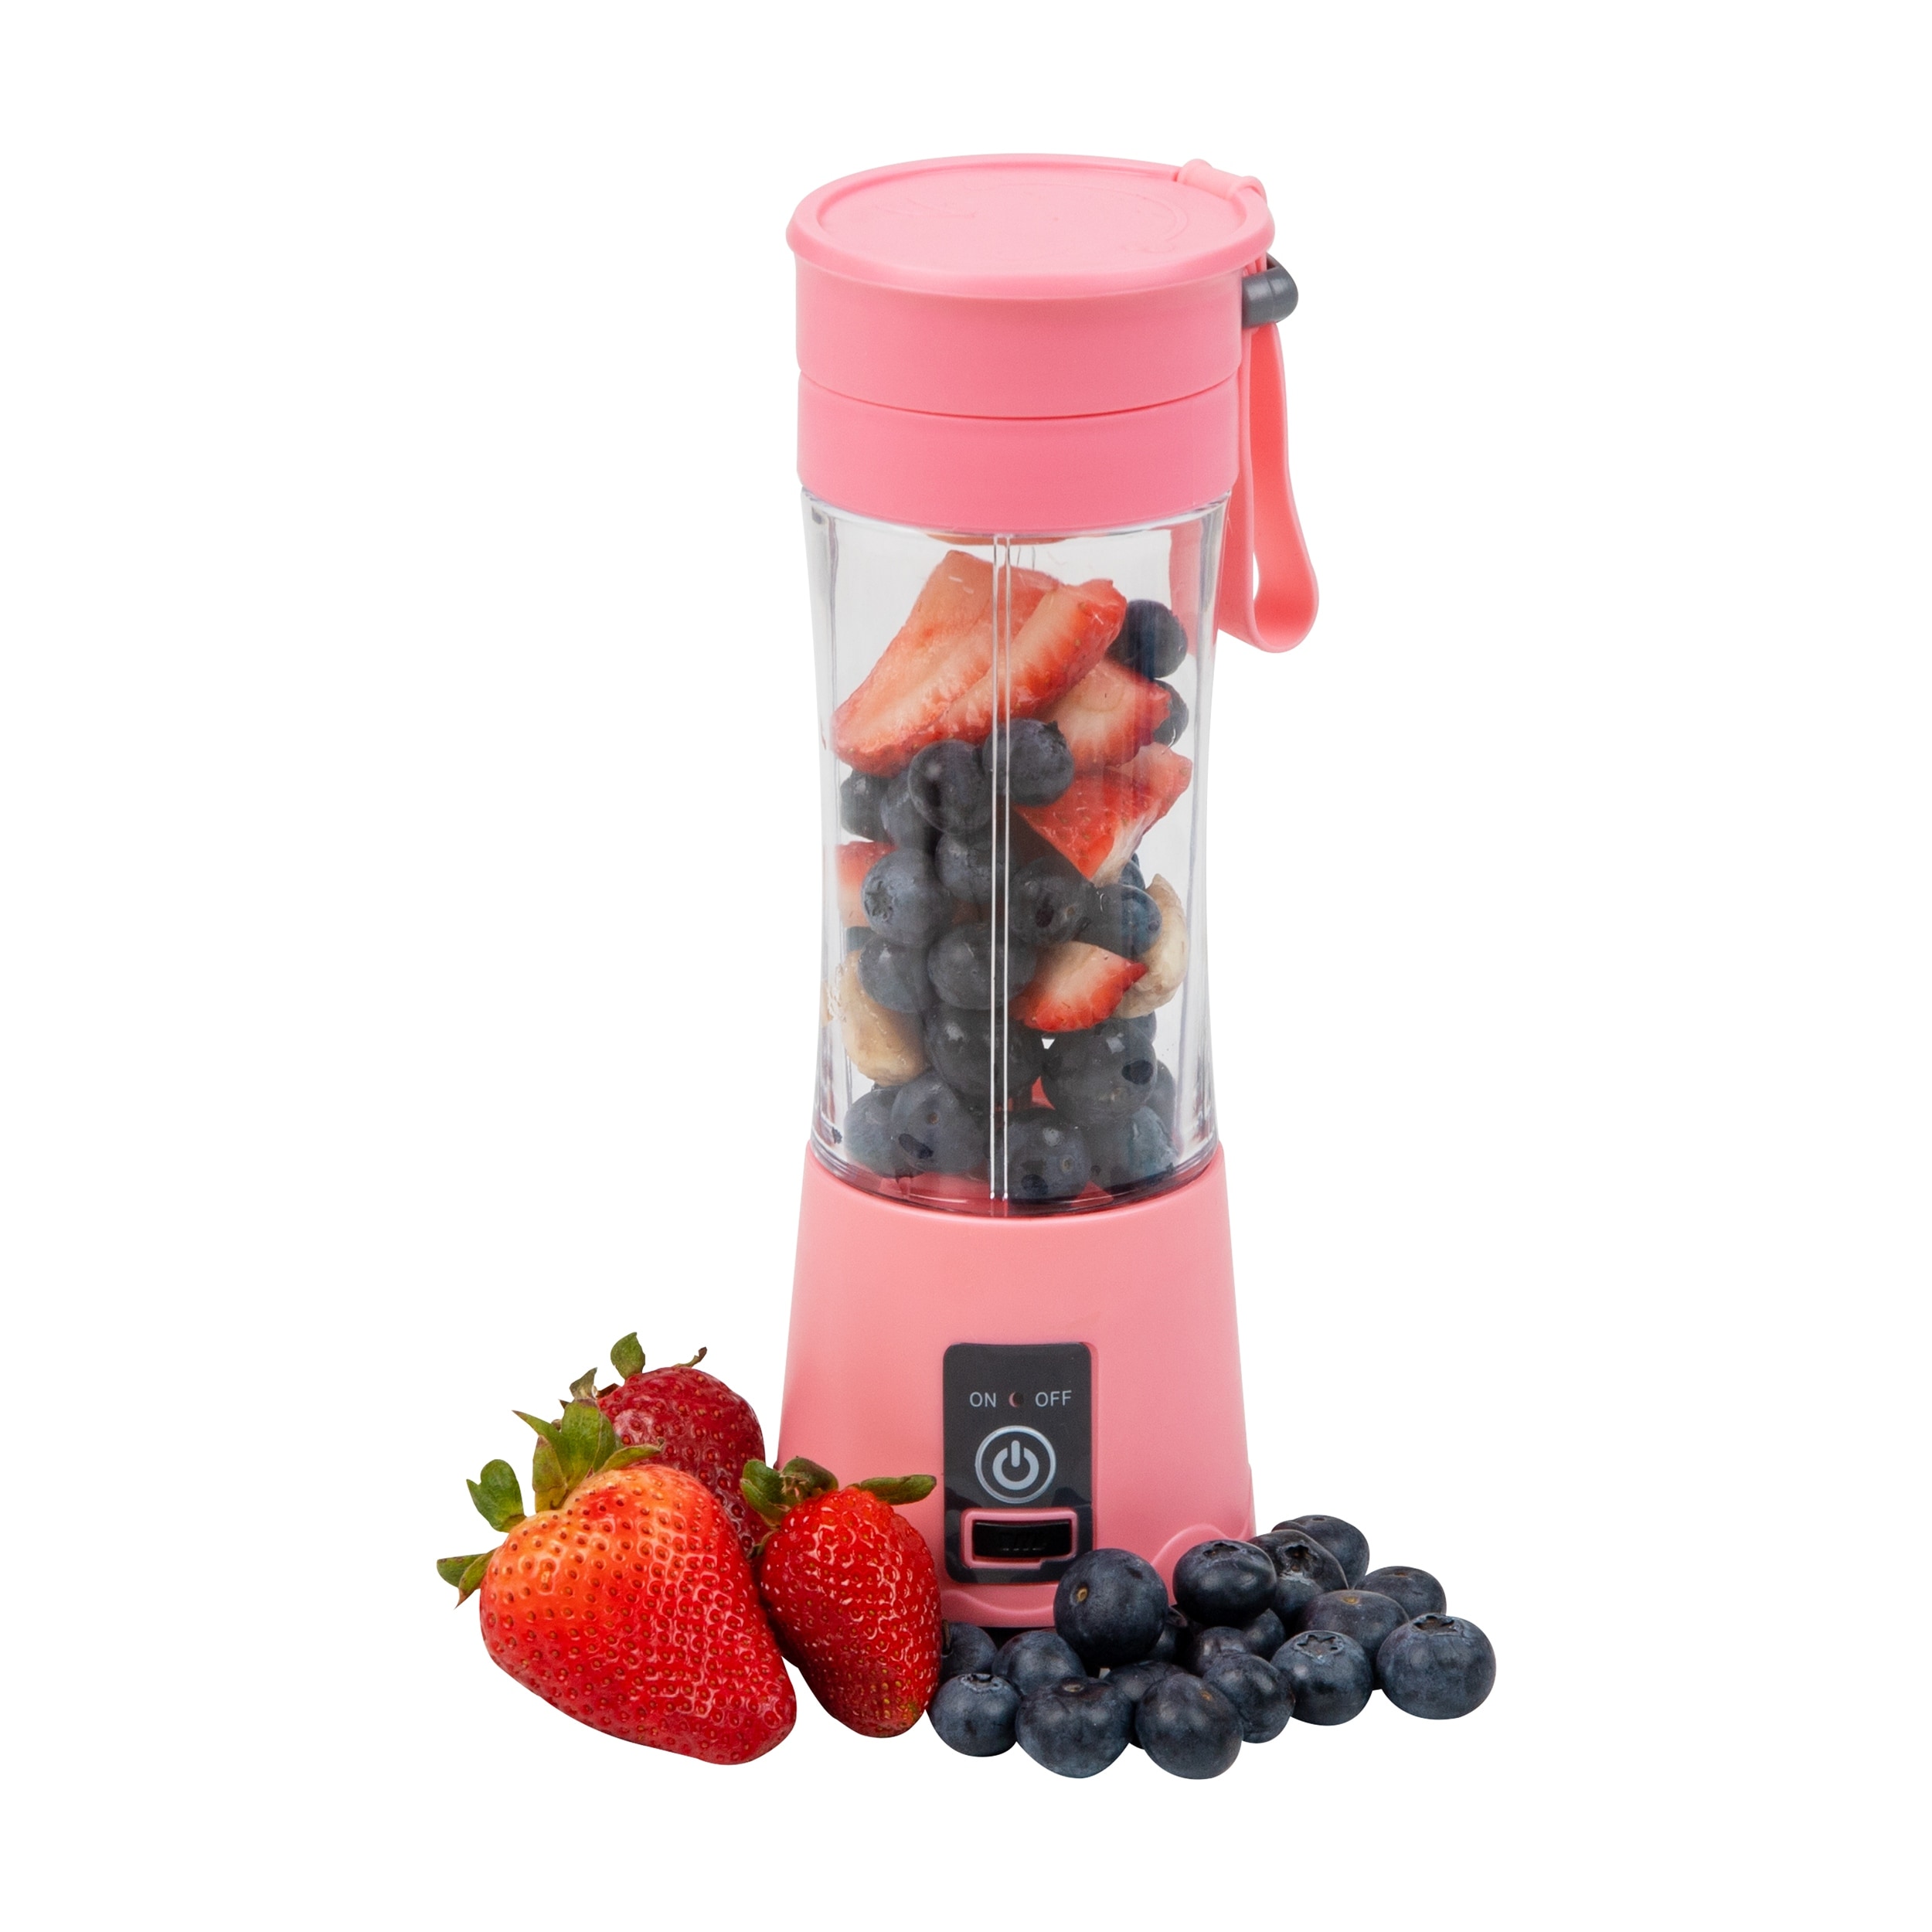 https://ak1.ostkcdn.com/images/products/is/images/direct/fe6097e19e7b00ebf08aec541e516046b5f61fb6/Mind-Reader-Handheld%2C-Rechargeable-Personal-Juicer%2C-USB-Powered%2C-Portable-Blender.jpg